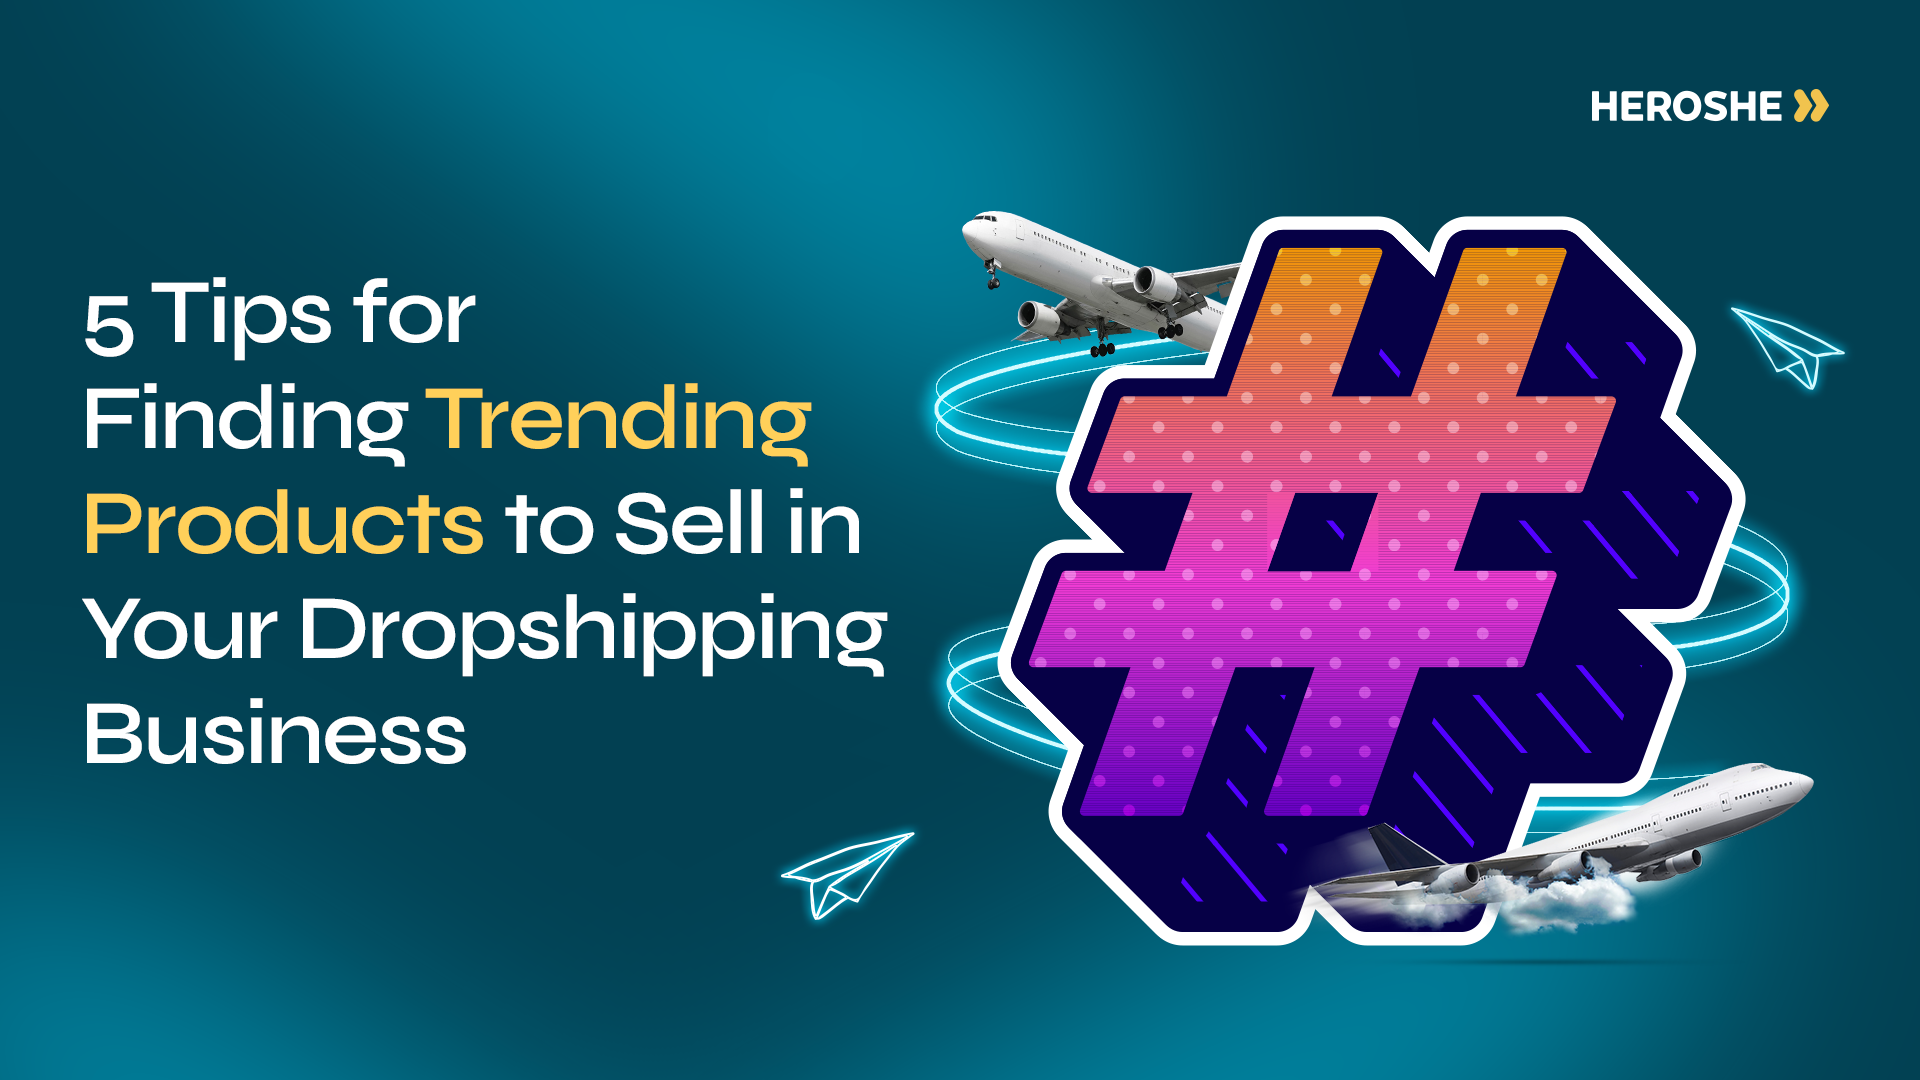 5 Tips For Finding Trending Products to Sell in Your Dropshipping Business